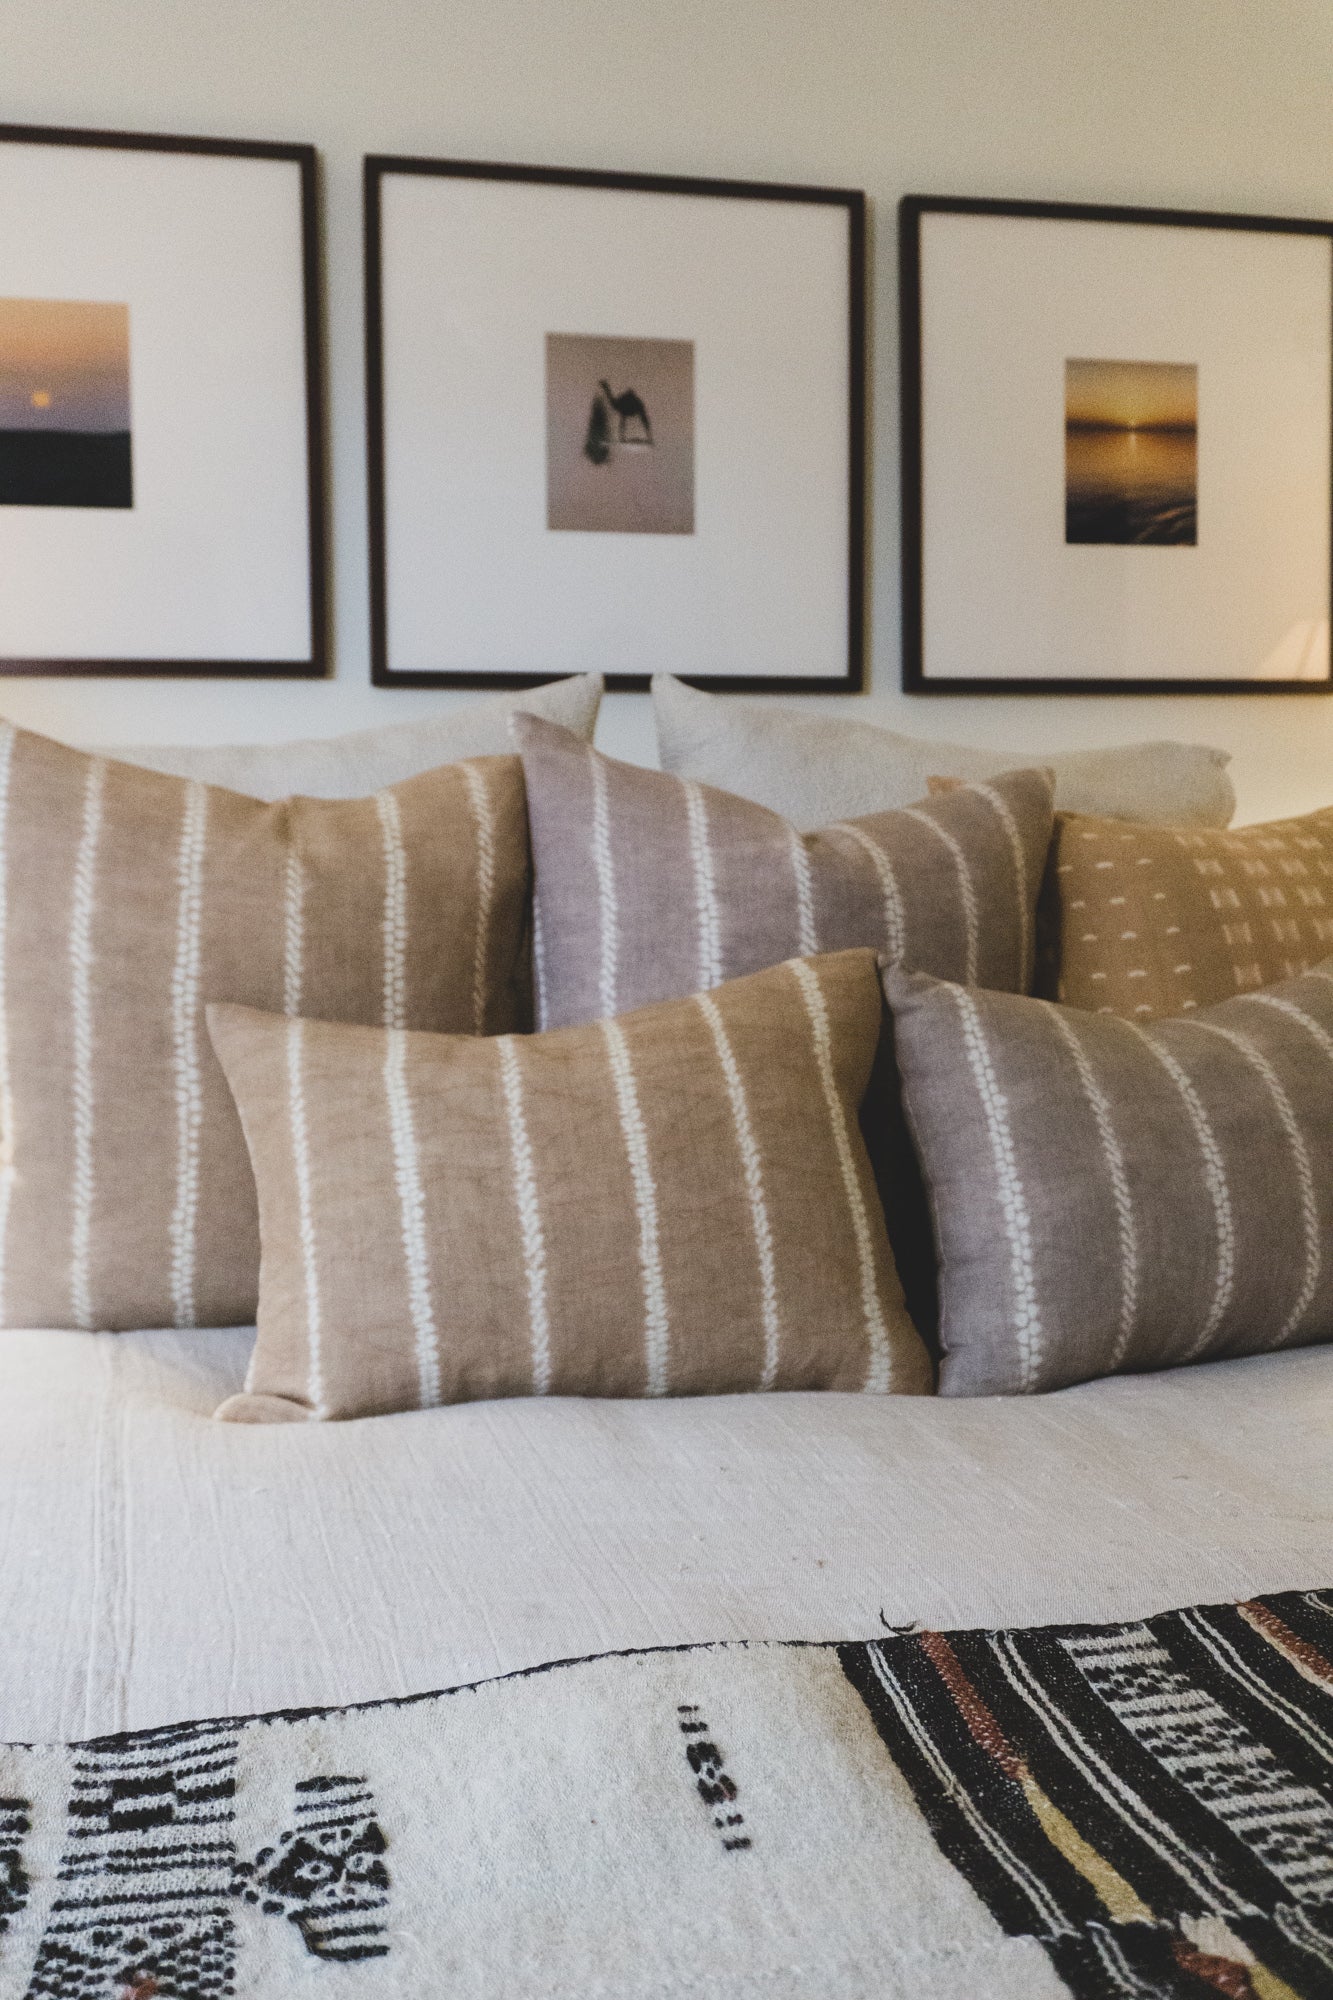 Artisan made, Shibori dyed (Japanese tie-dye) pillows are arranged on a bed. The linen pillows feature a stripe pattern which is made by sewing the pillows prior to hand dying them. They are shown in sand and neutral gray color.